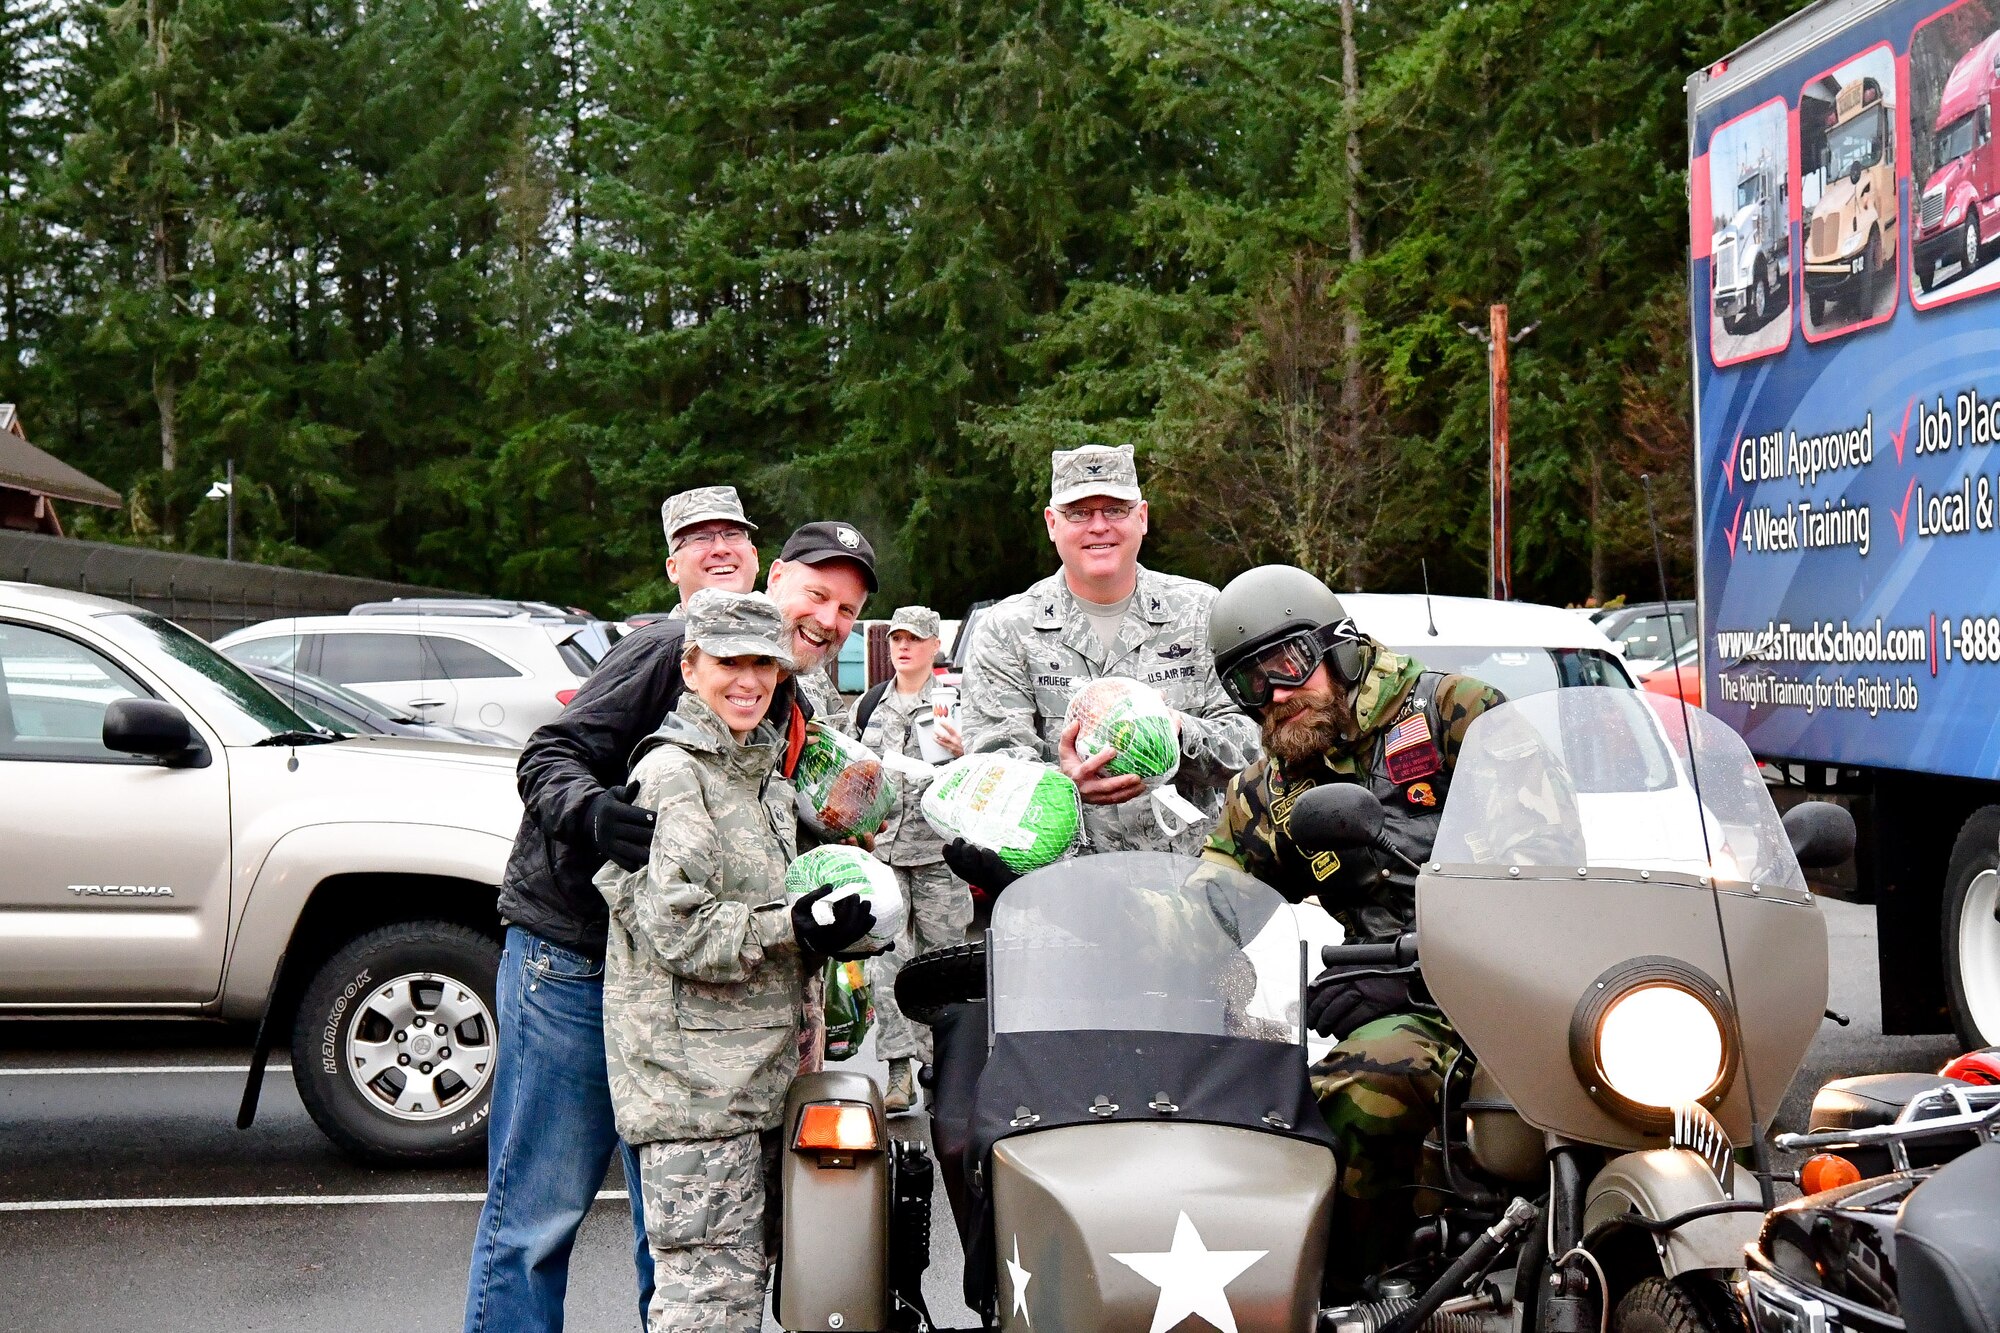 Members of the Combat Veterans Motorcycle Association deliver turkeys to Western Air Defense leadership as part of the 8th annual Operation Turkey Drop Nov. 16, 2017.  Operation Turkey Drop helps ease financial burdens of holiday expenses for Airmen and Soldiers on Joint Base Lewis-McChord and Camp Murray.  The event is made possible by the Association of the United States Army, the Air Force Association and Pierce Military and Business Alliance and dozens of local businesses and organizations.  (U.S. Air National Guard photo by Capt. Kimberly D. Burke)